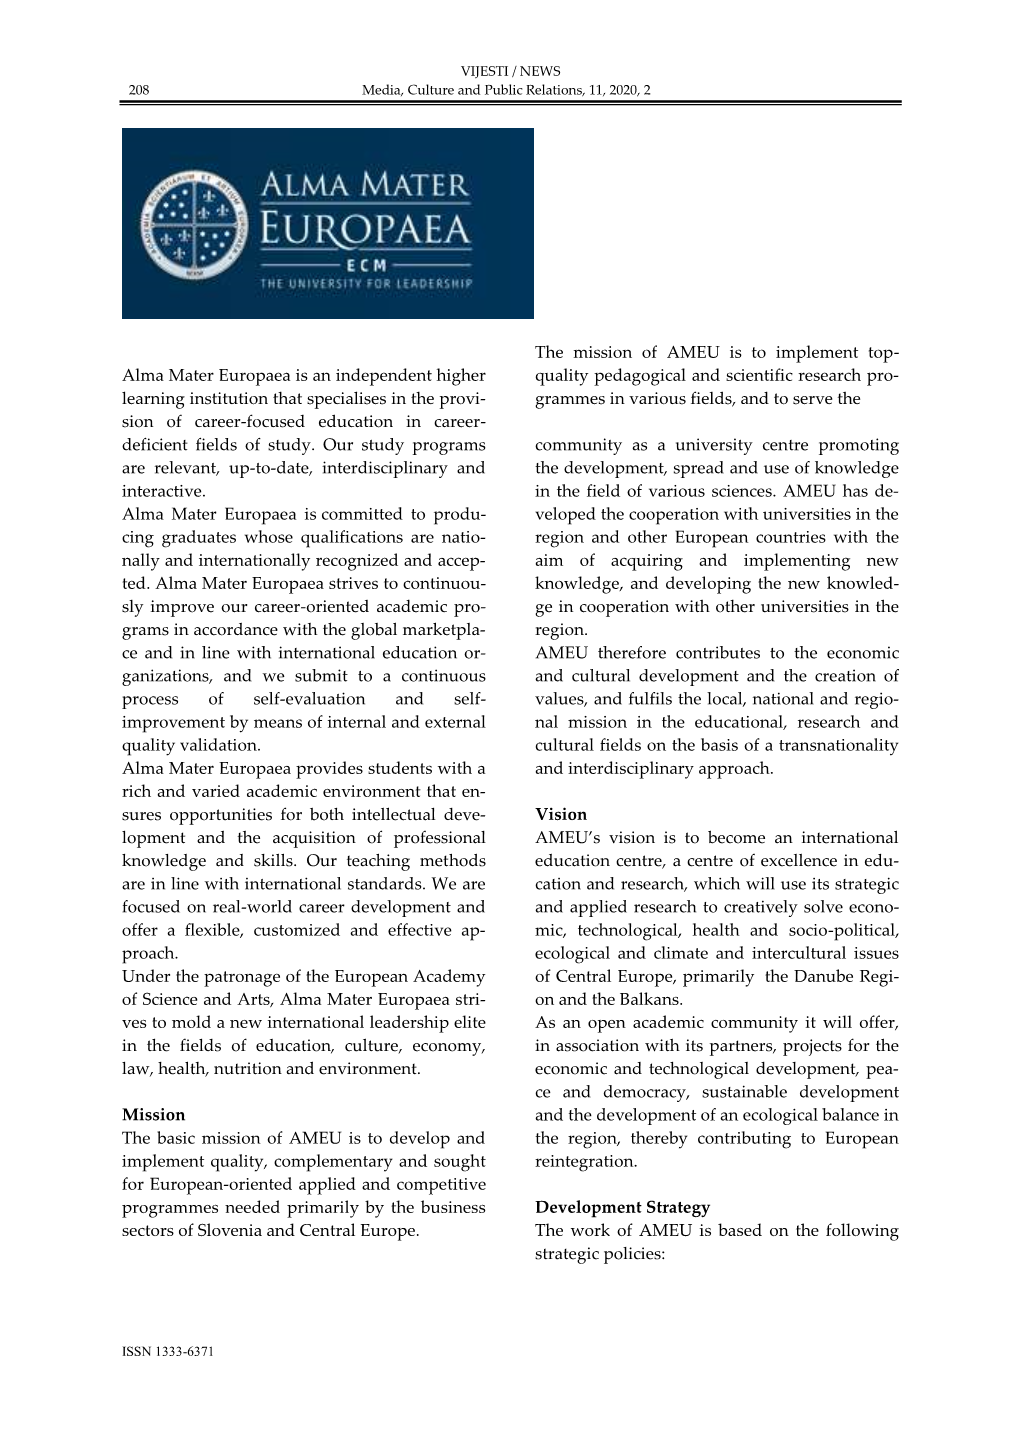 Alma Mater Europaea Is an Independent Higher Learning